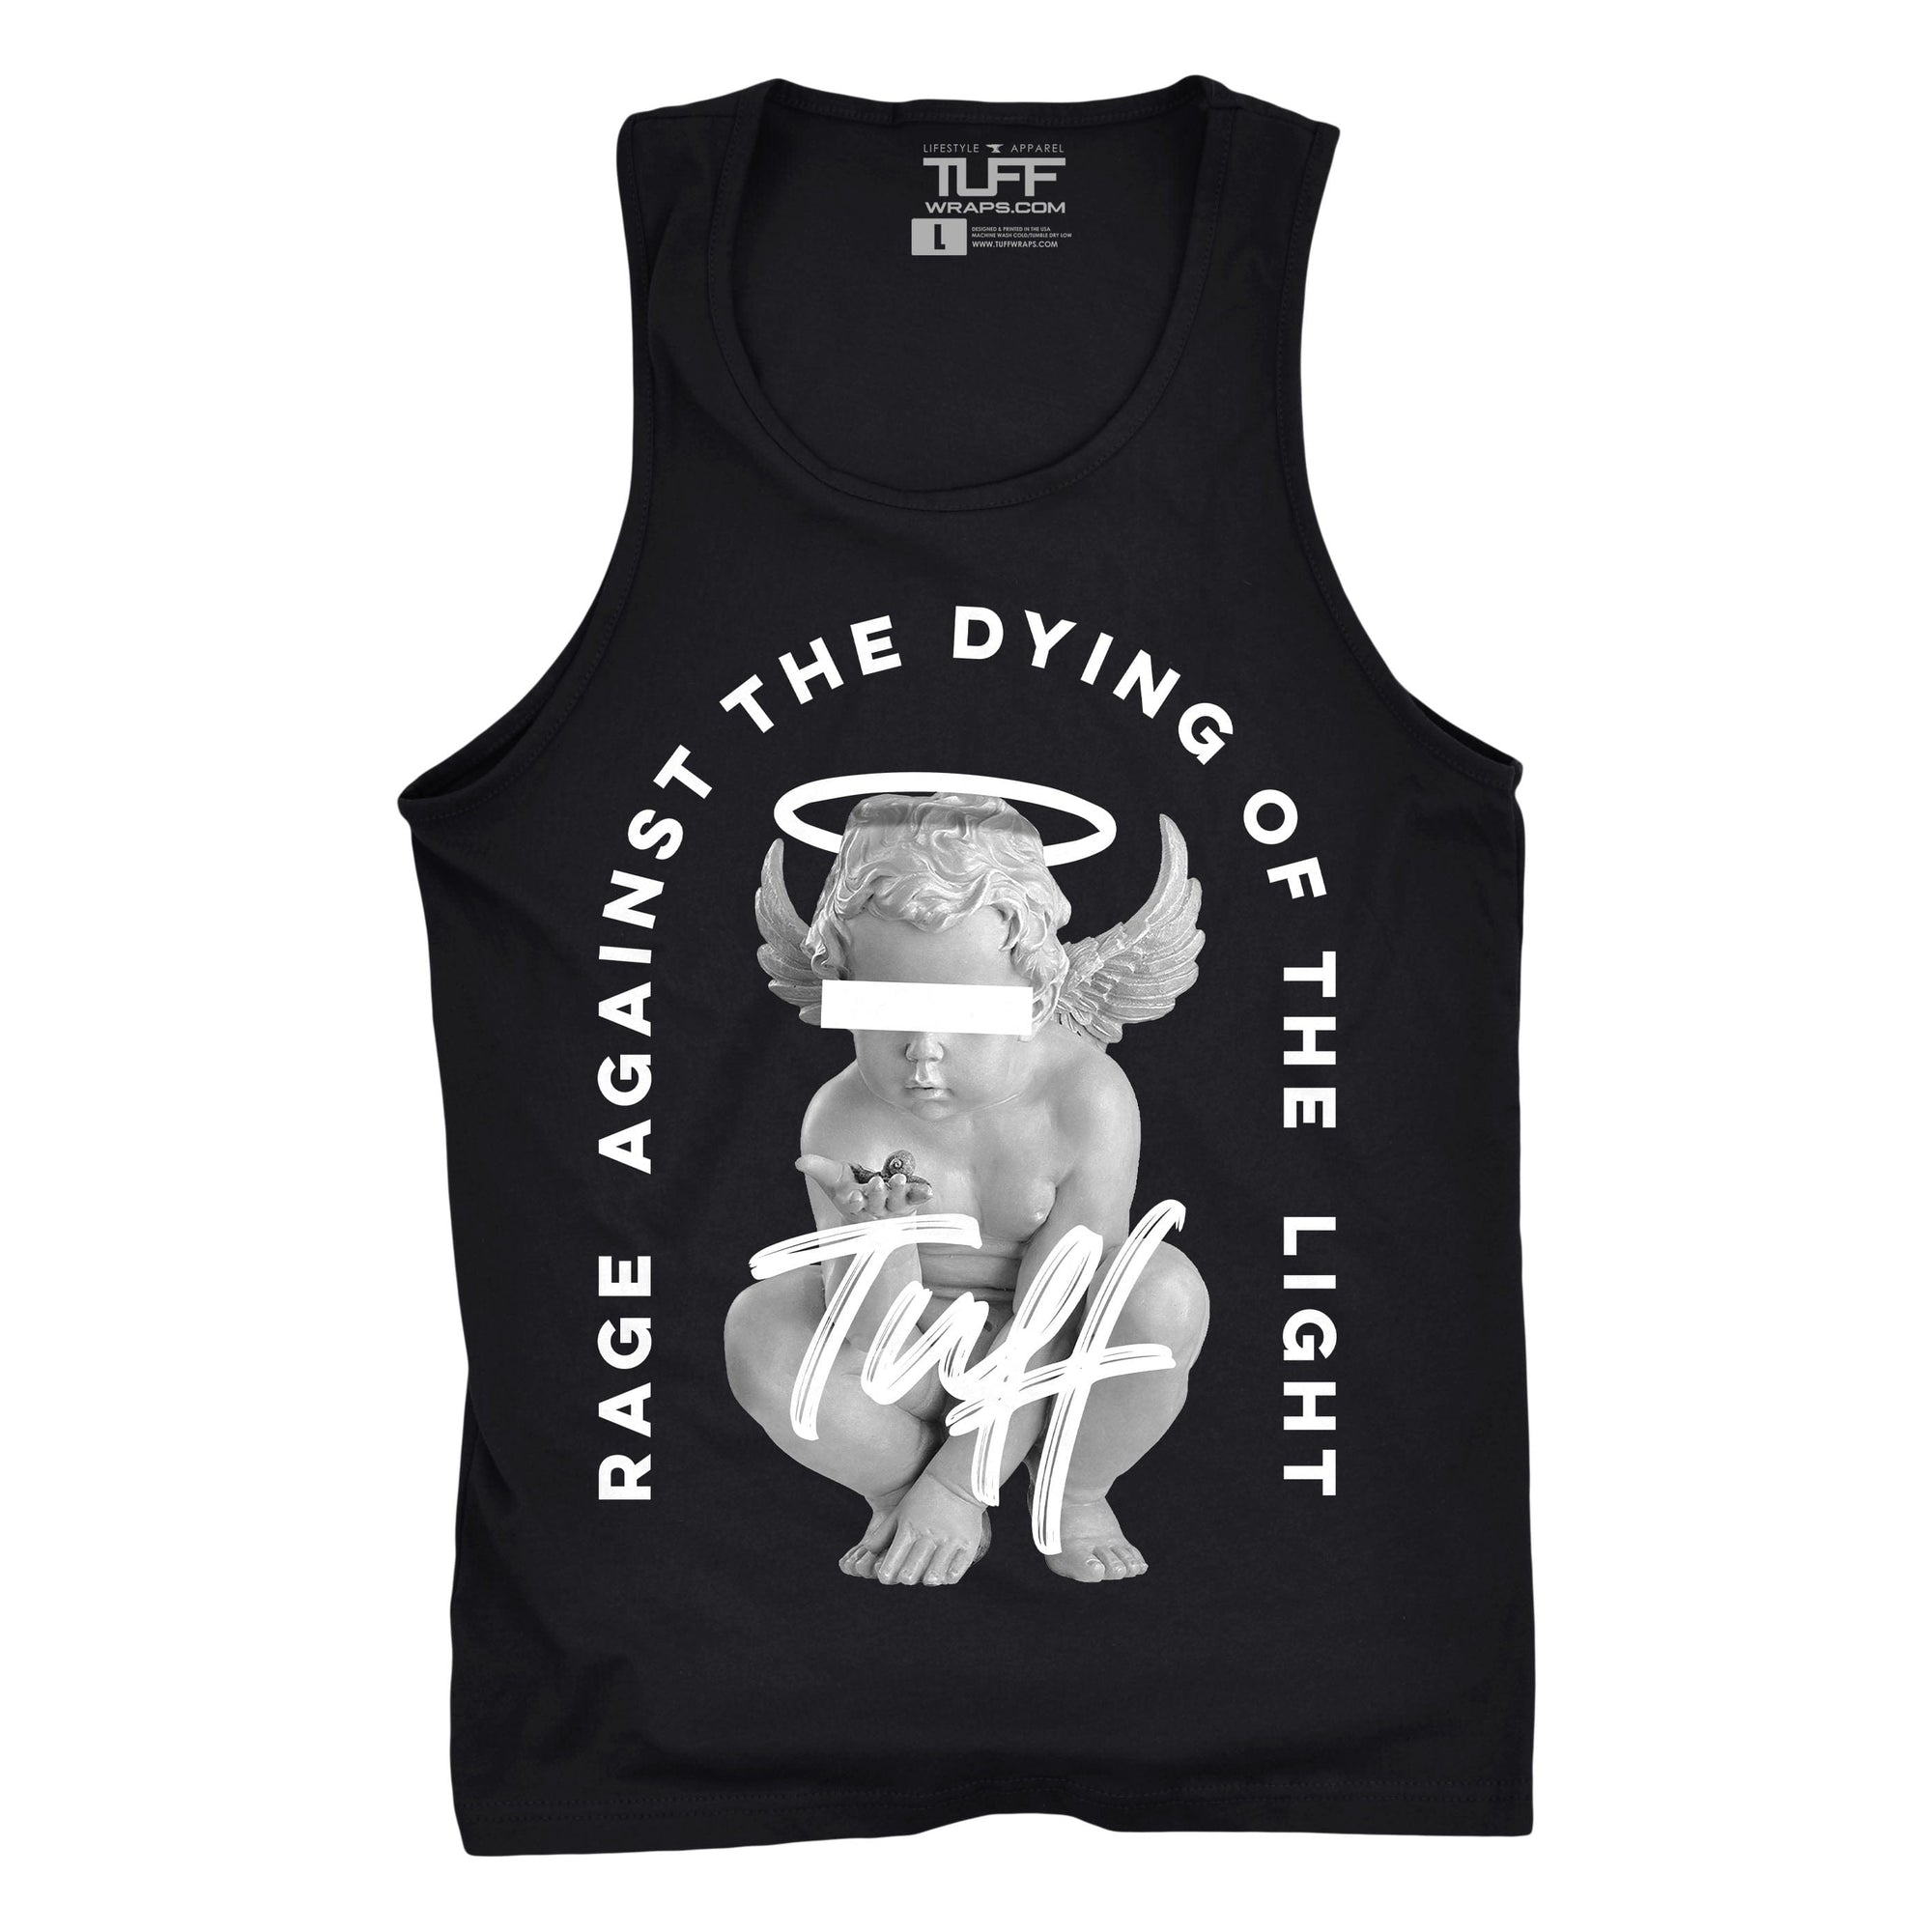 Rage Against the Dying of the Light Tank S / Black TuffWraps.com